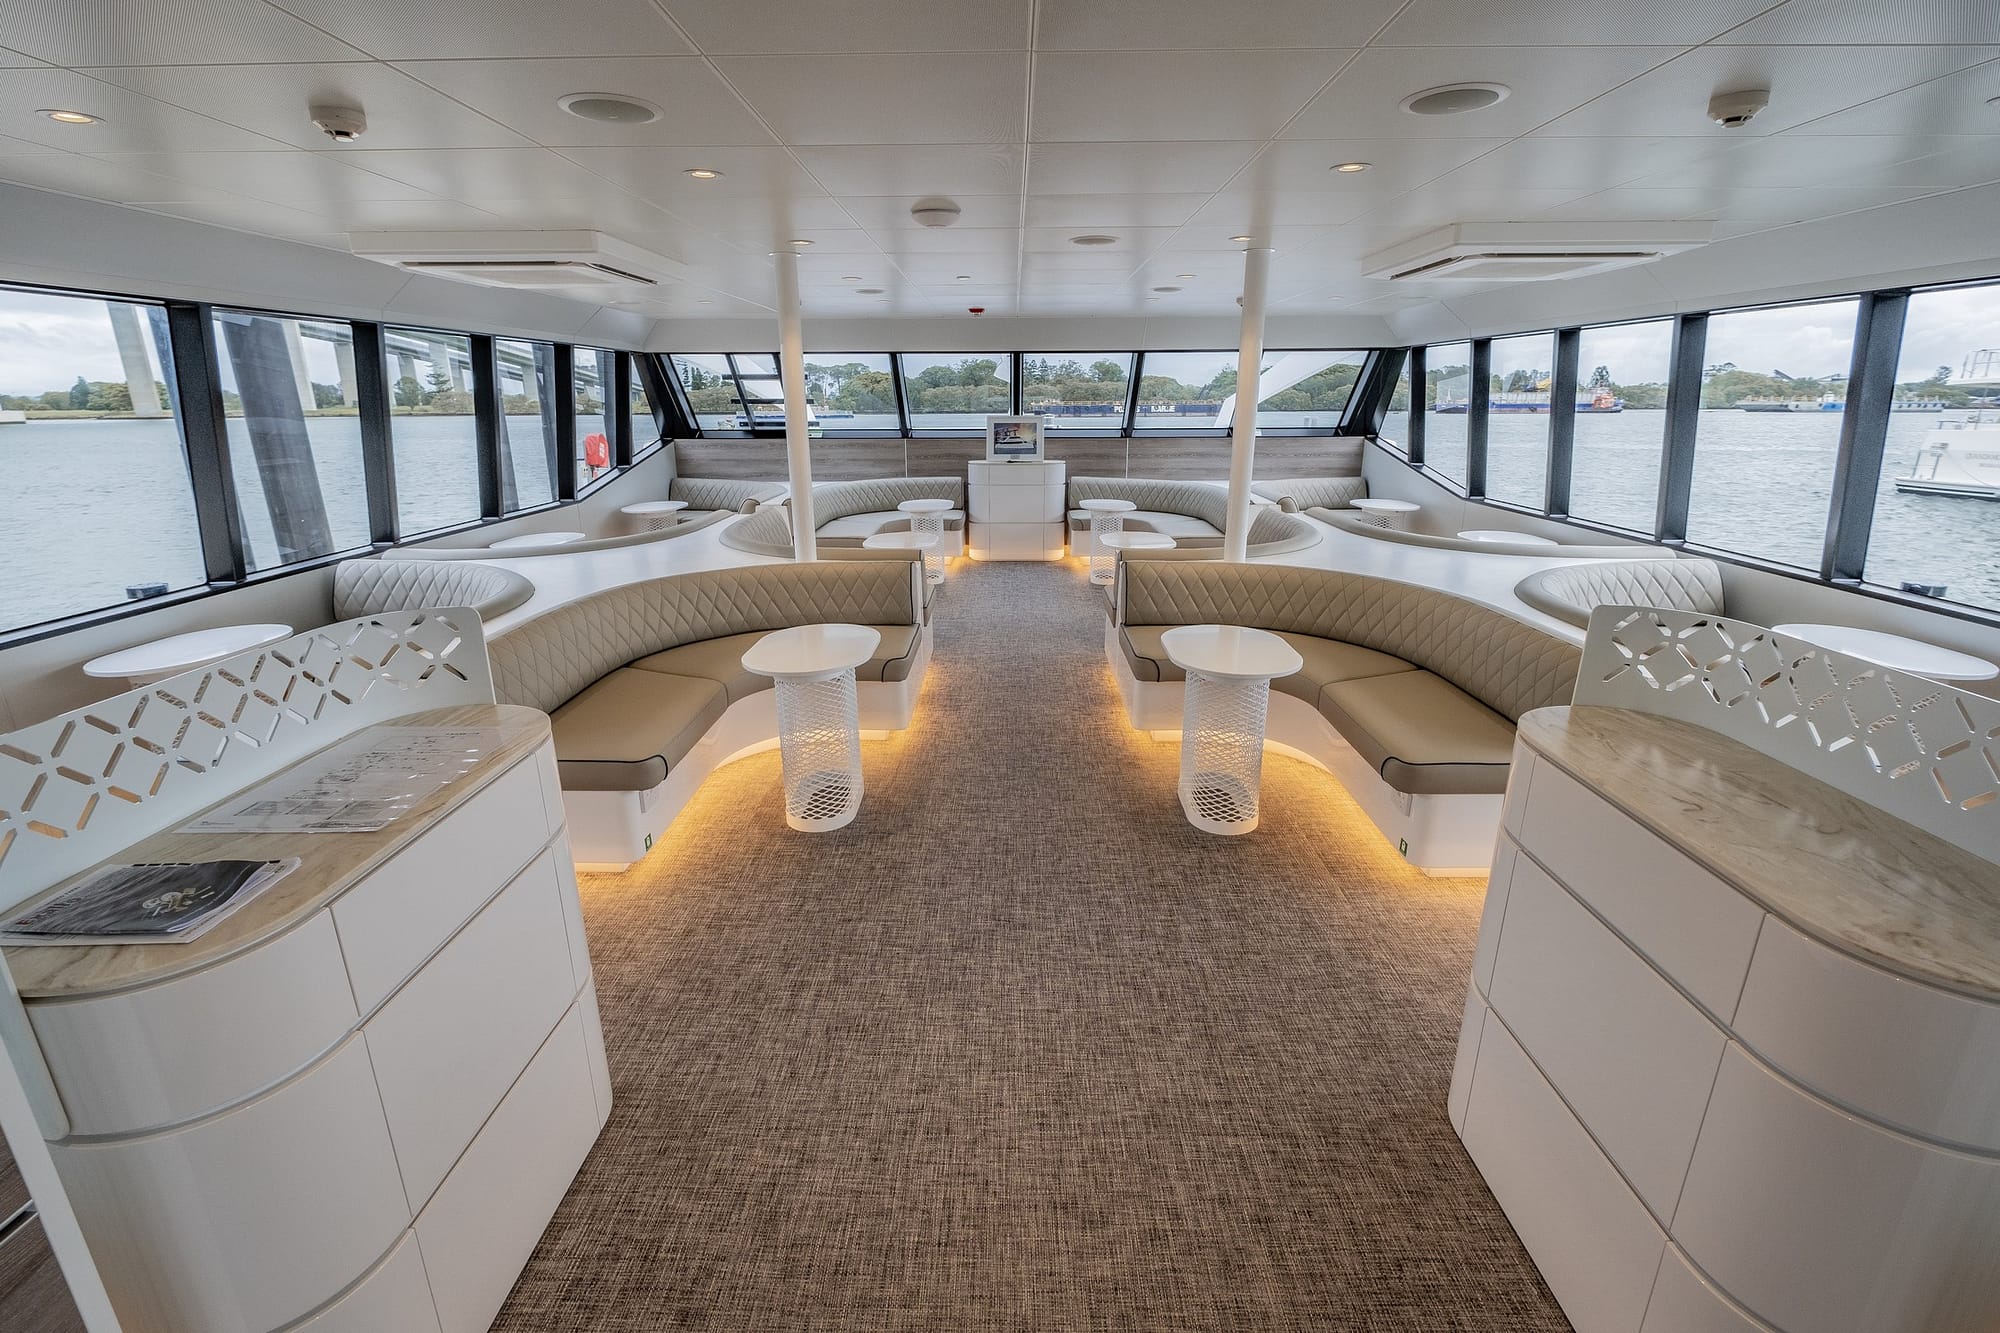 luxury boat interior with lighting under the seats